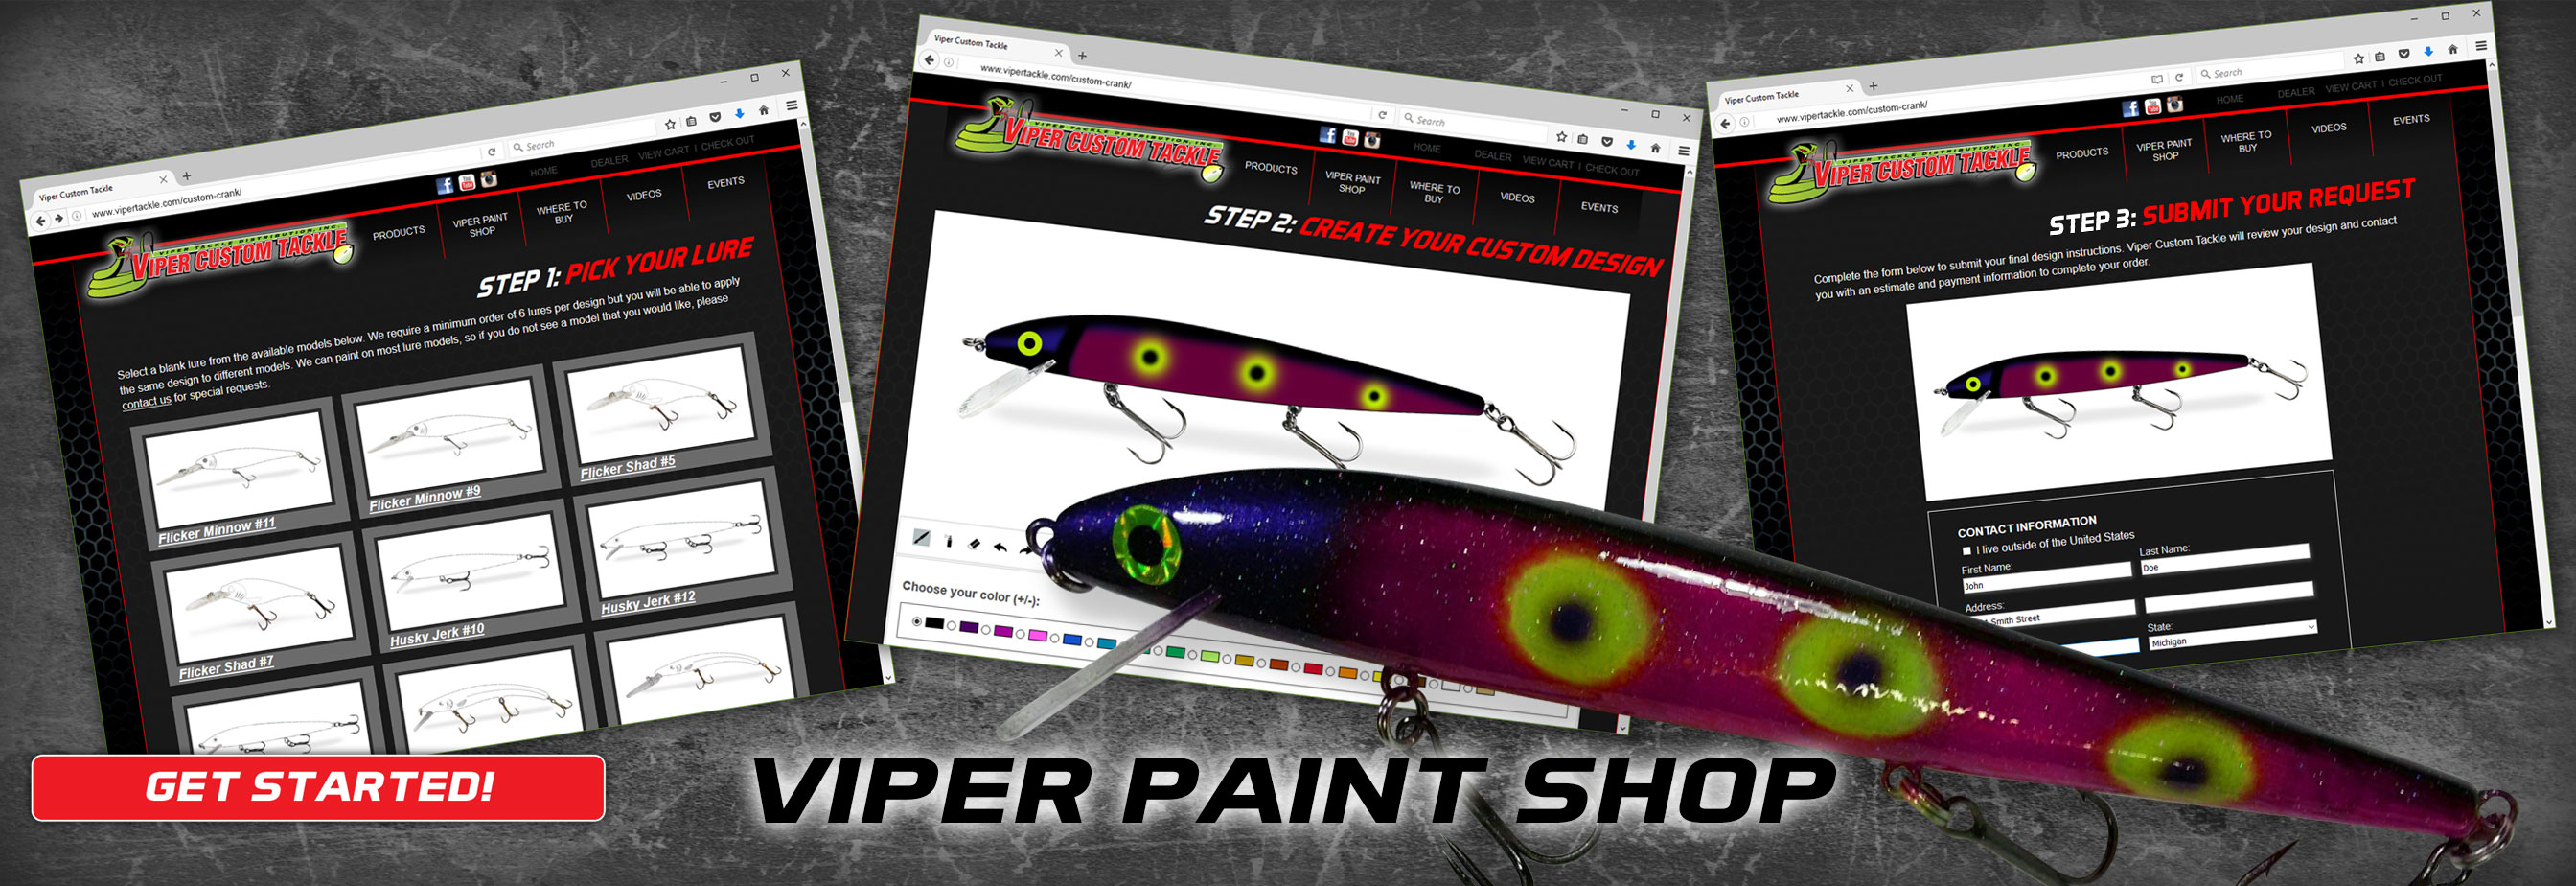 Viewer challenged me to paint flames on a custom designed fishing lure 